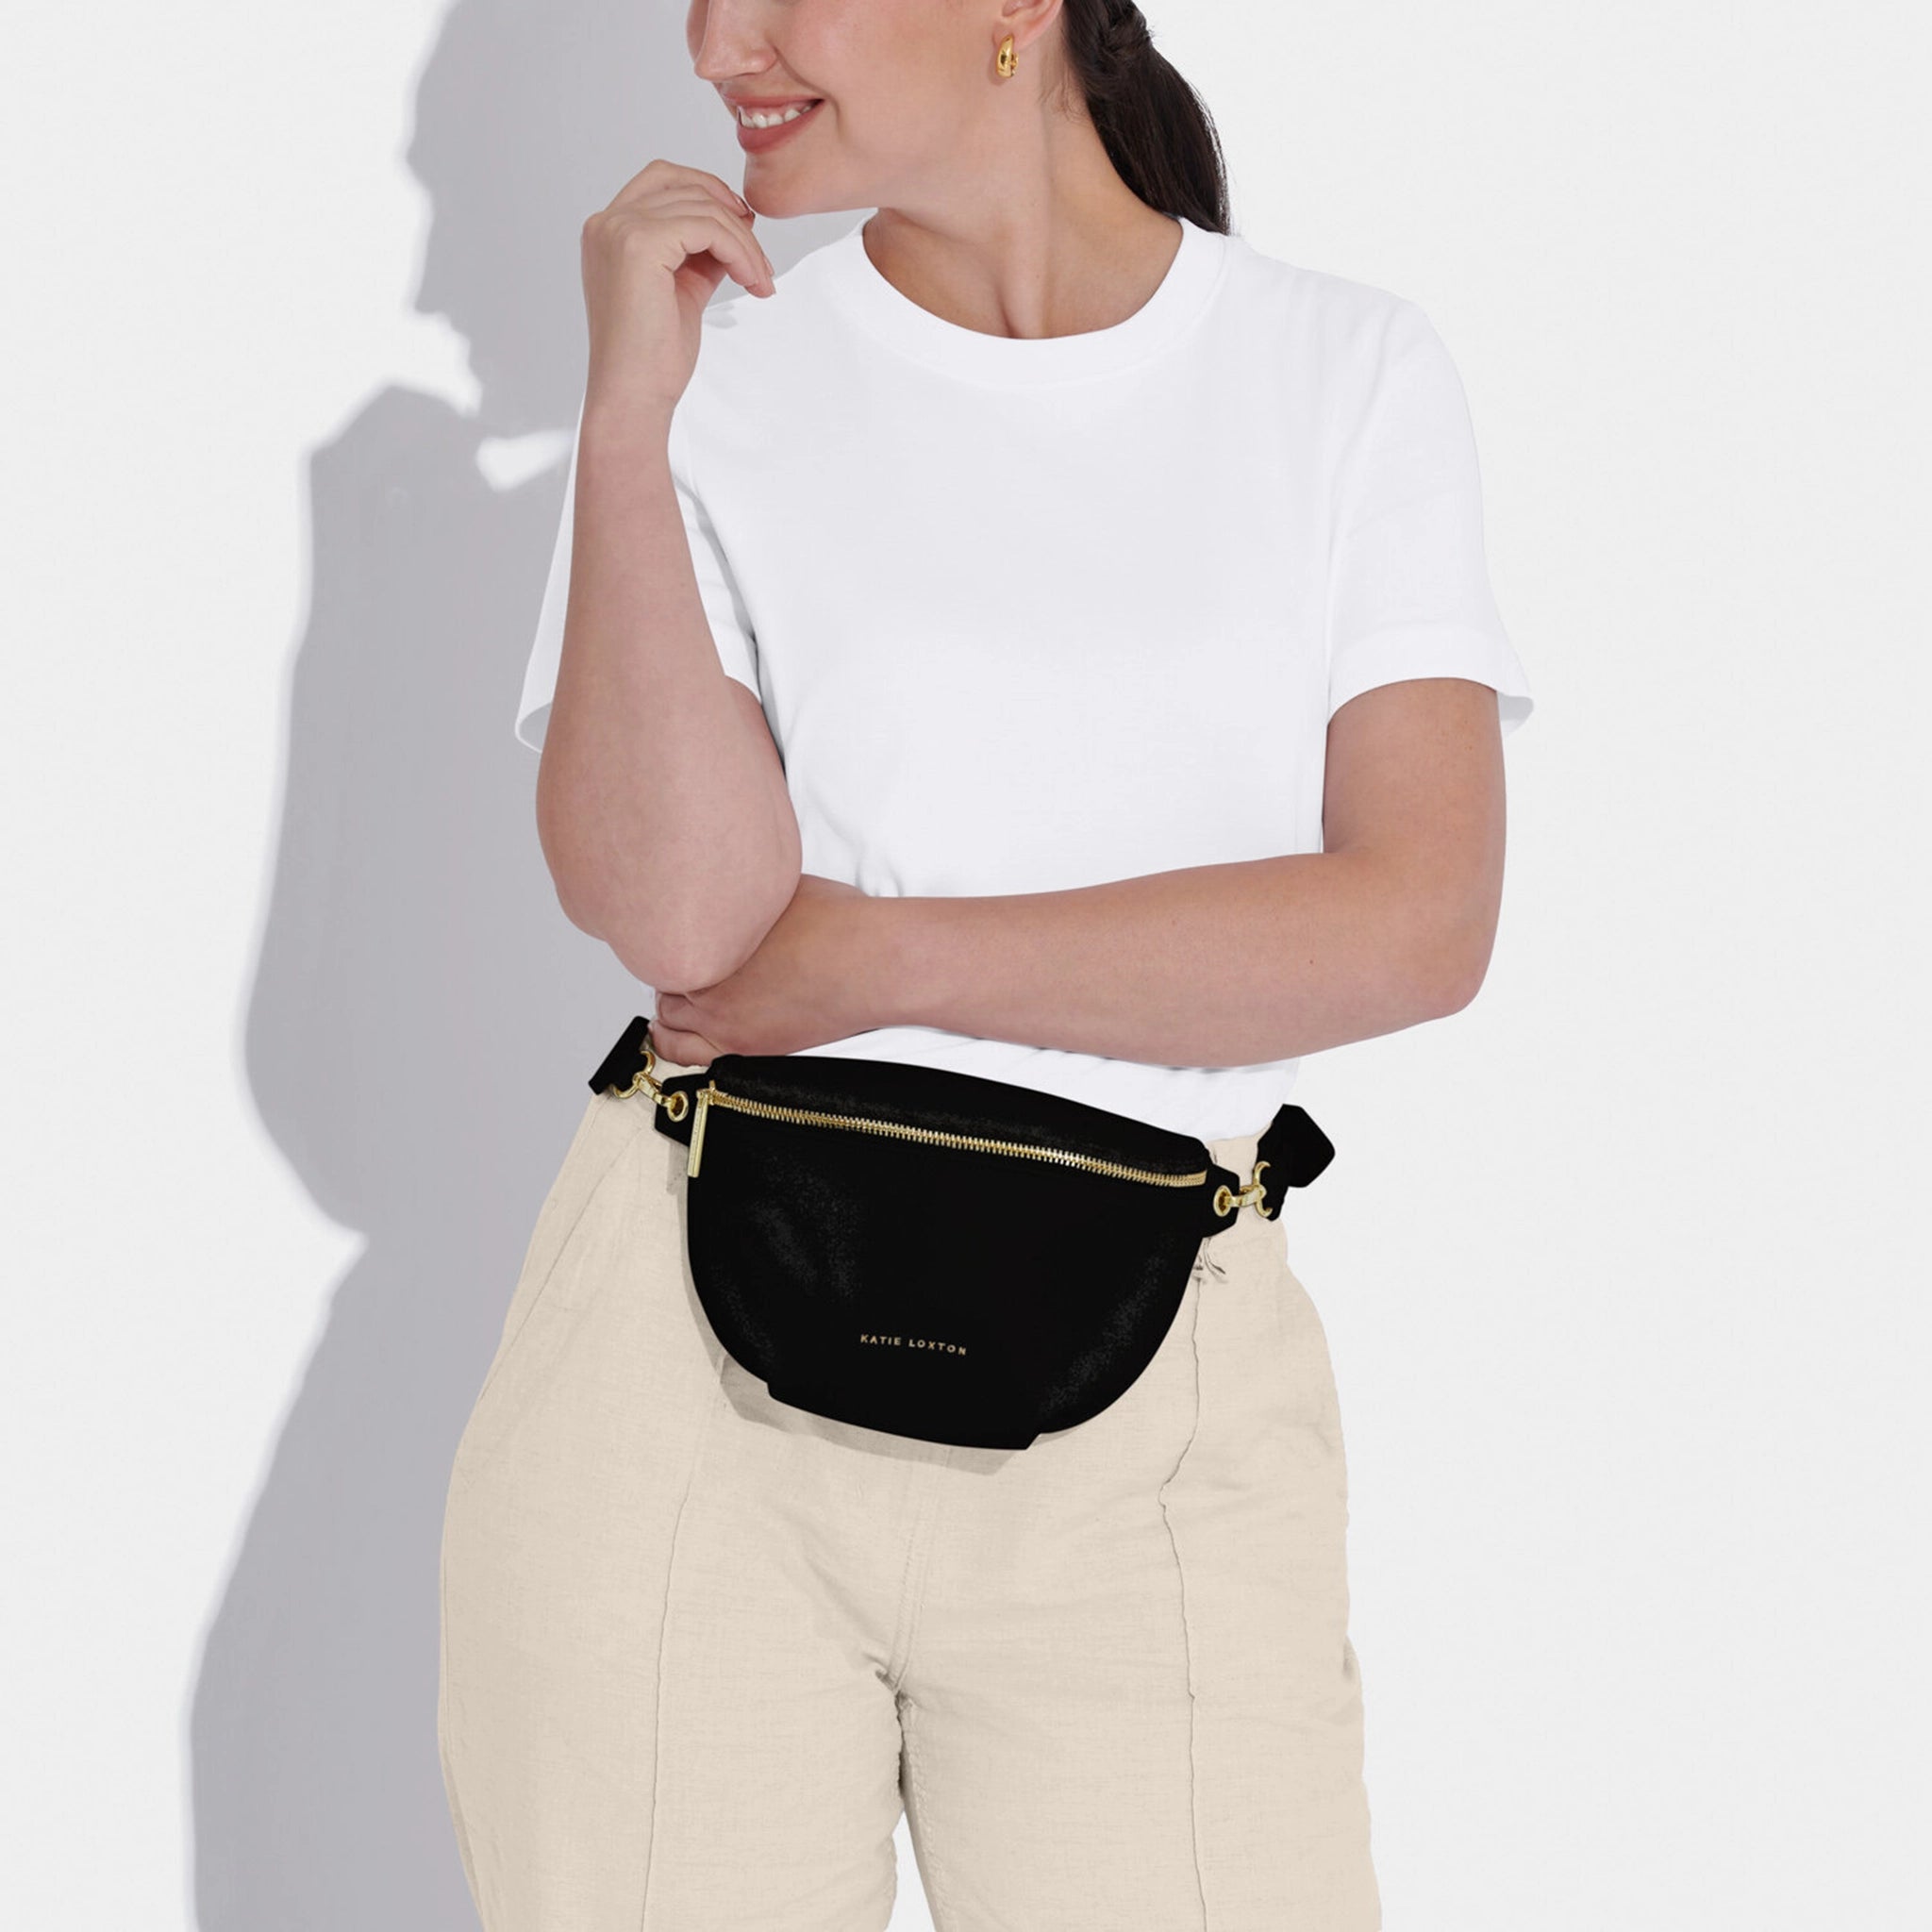 Model wearing a belt bag in faux leather and black with gold hardware